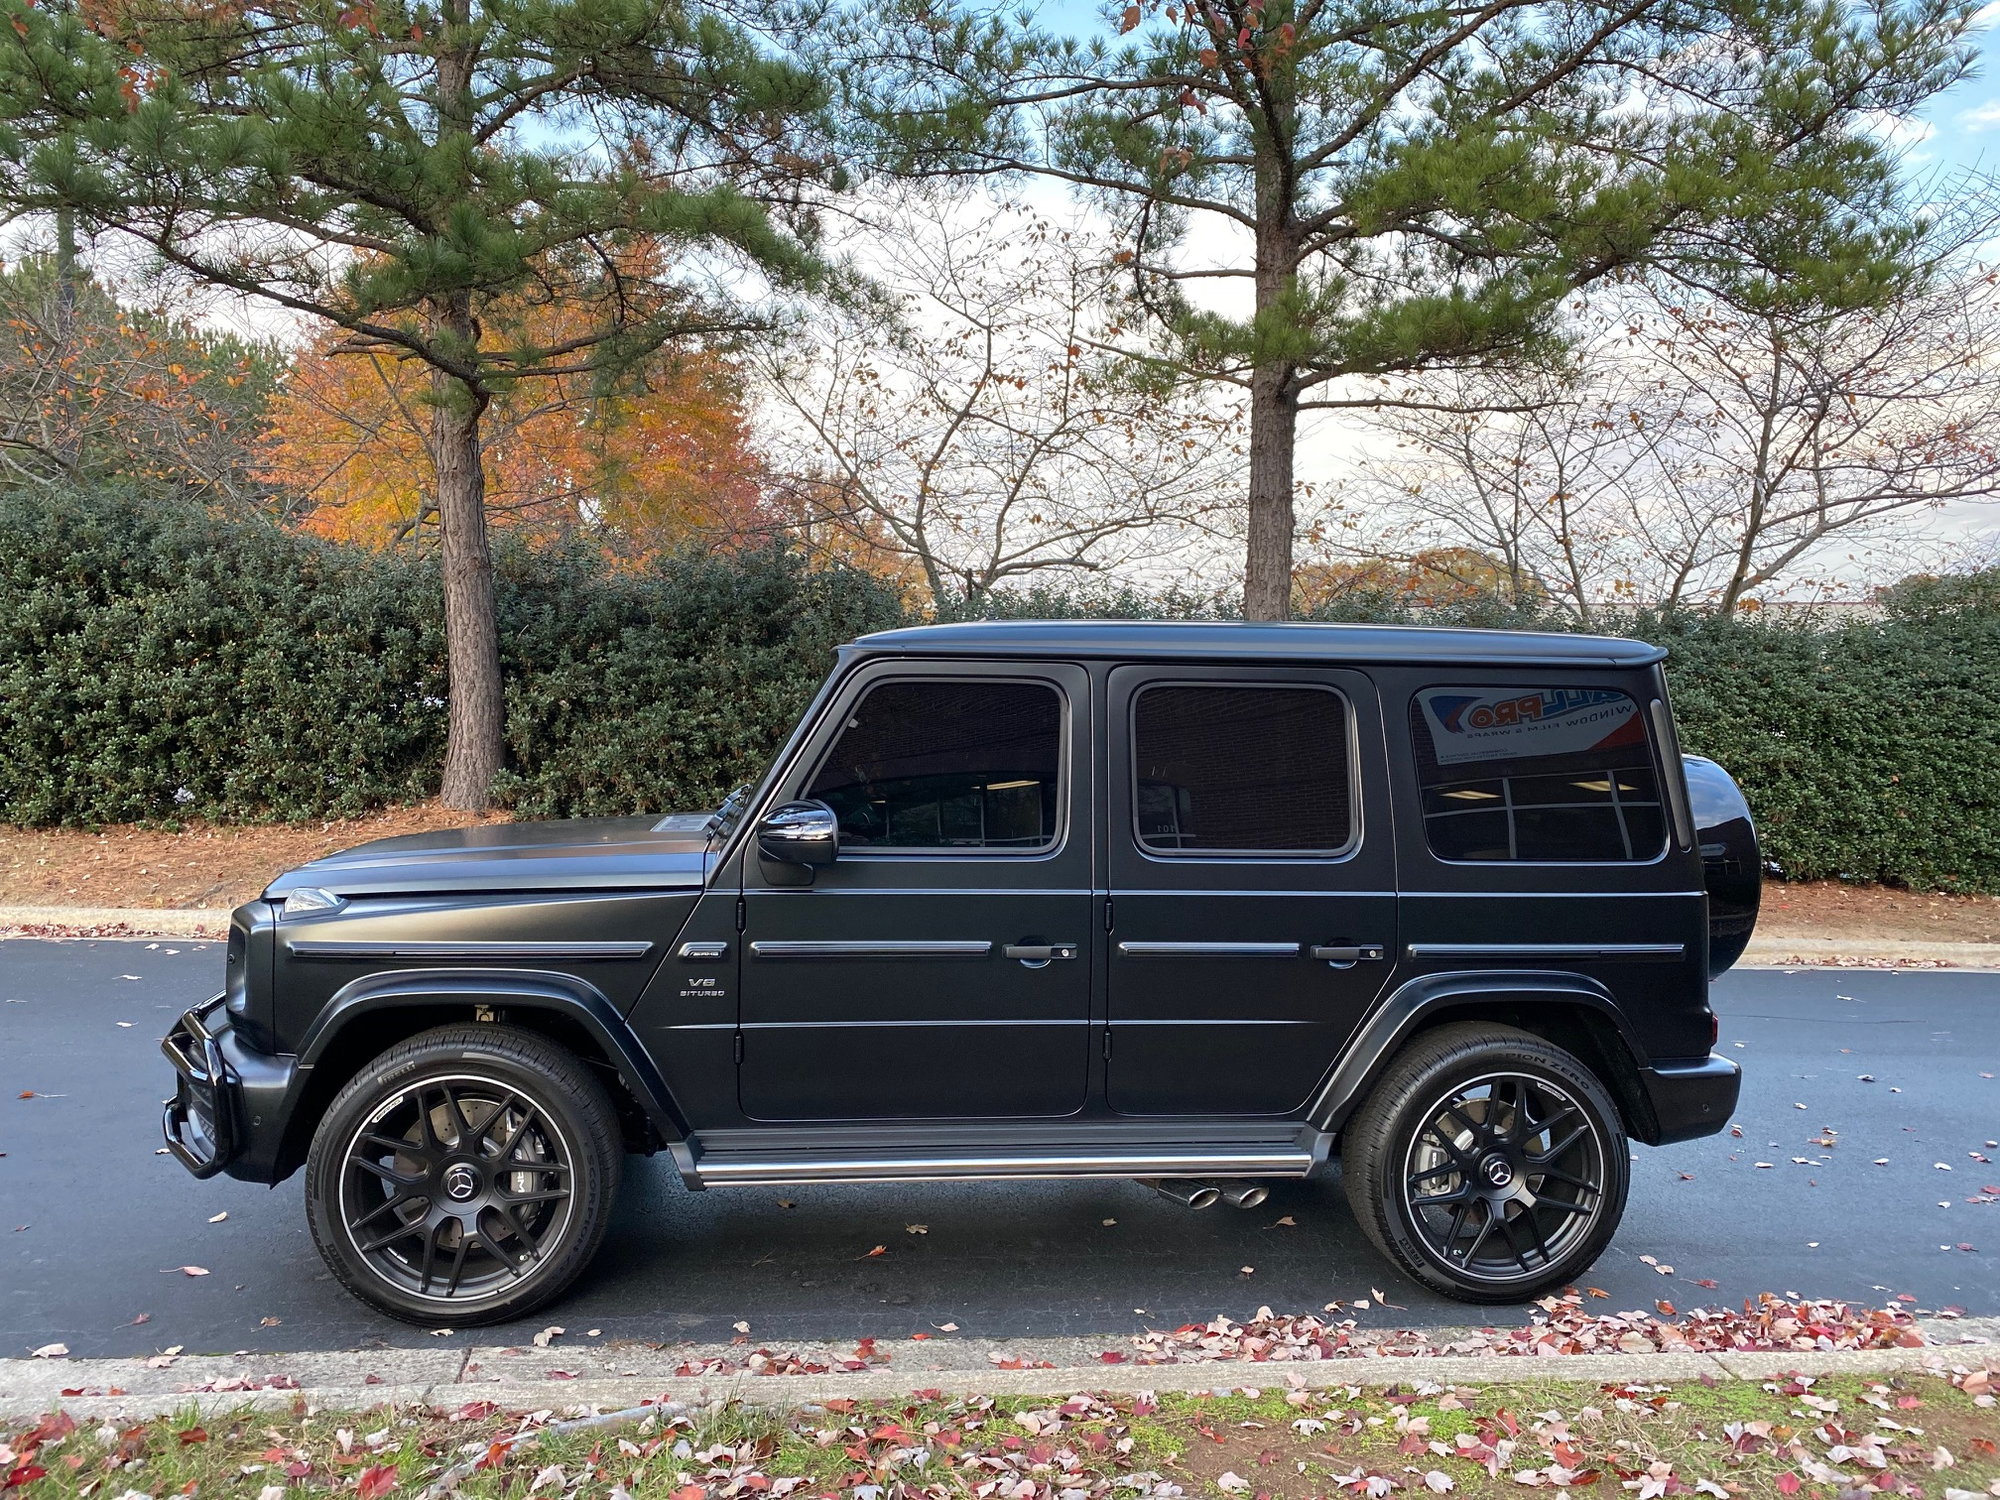 G63 Side Orange And Red Reflectors Wrapped Blacked Out Pics Mbworld Org Forums